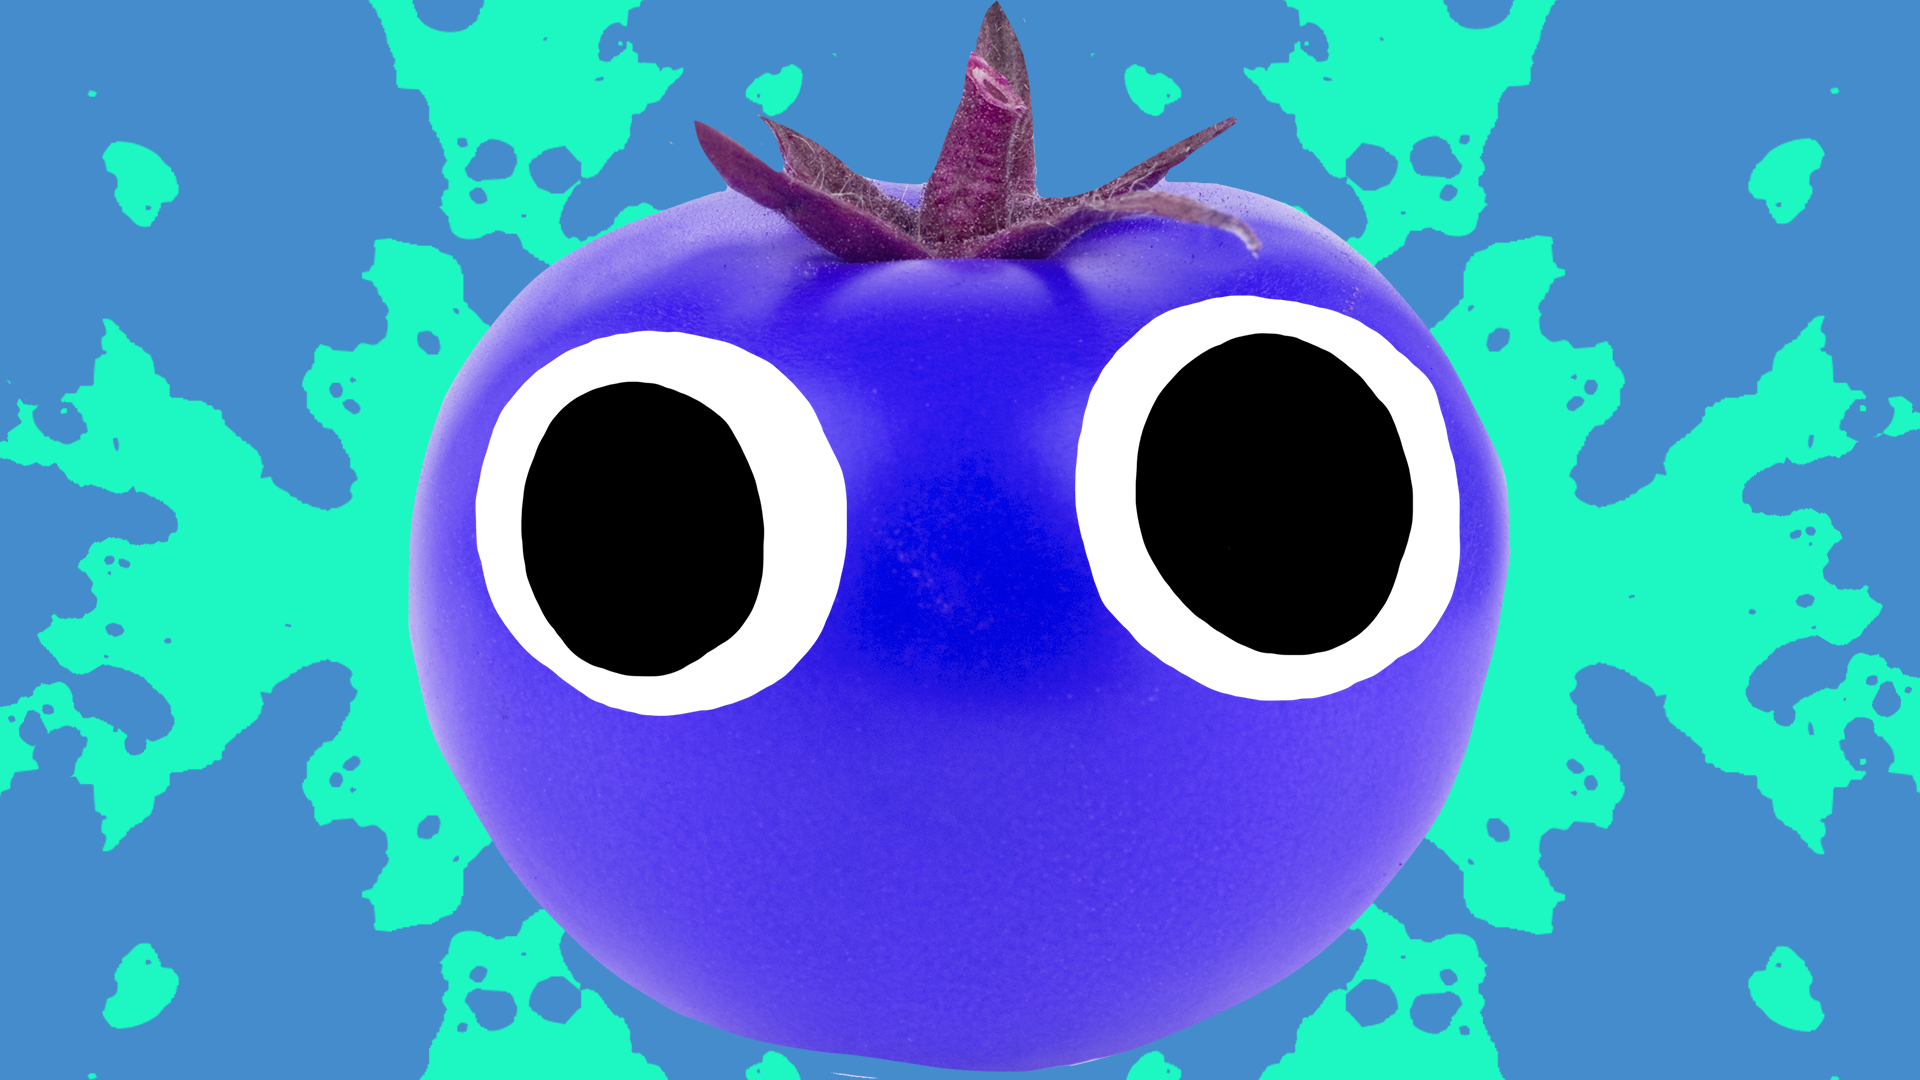 Blue tomato with eyes on blue and green background 